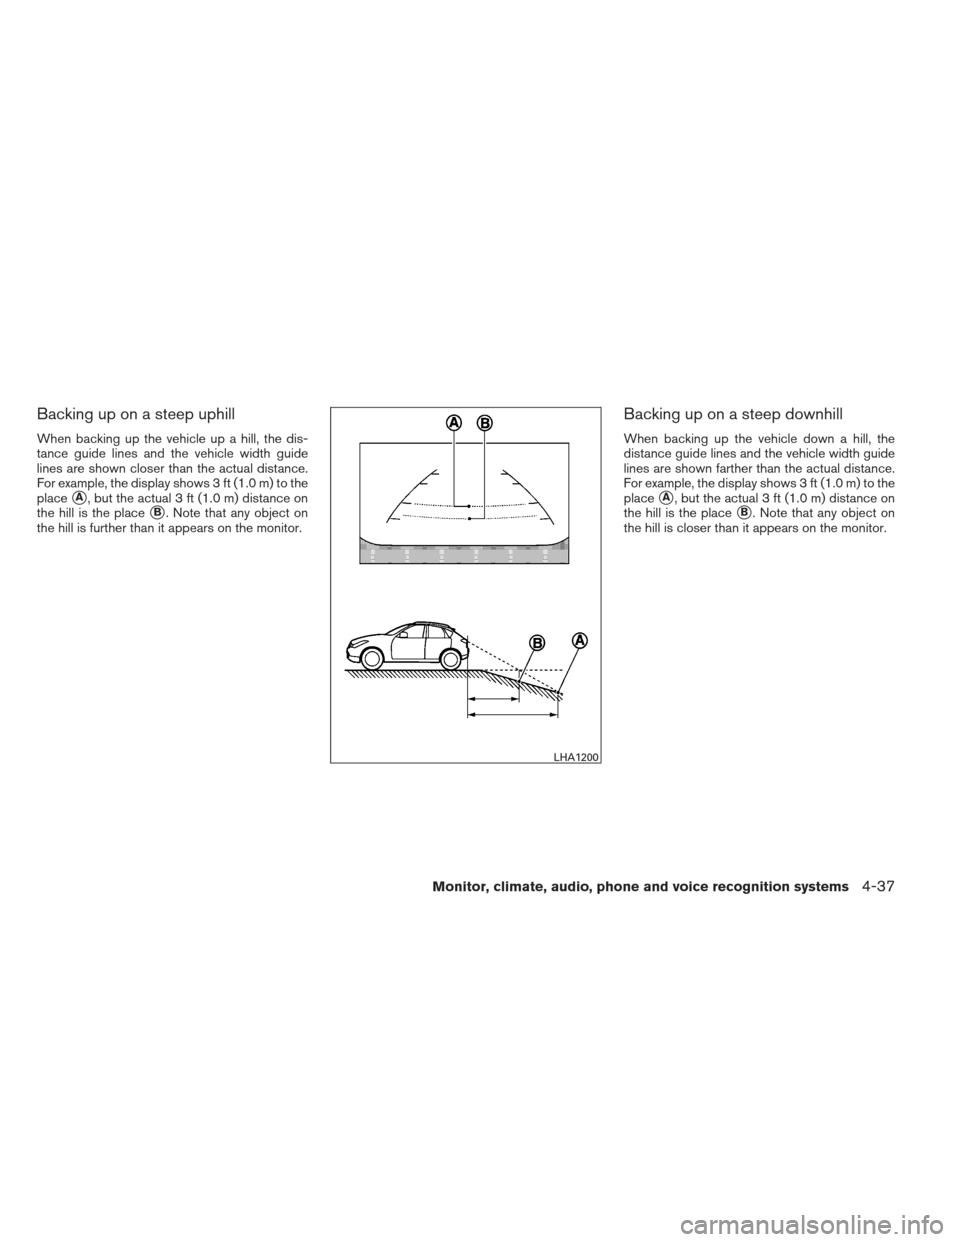 NISSAN PATHFINDER 2013 R52 / 4.G Owners Manual Backing up on a steep uphill
When backing up the vehicle up a hill, the dis-
tance guide lines and the vehicle width guide
lines are shown closer than the actual distance.
For example, the display sho